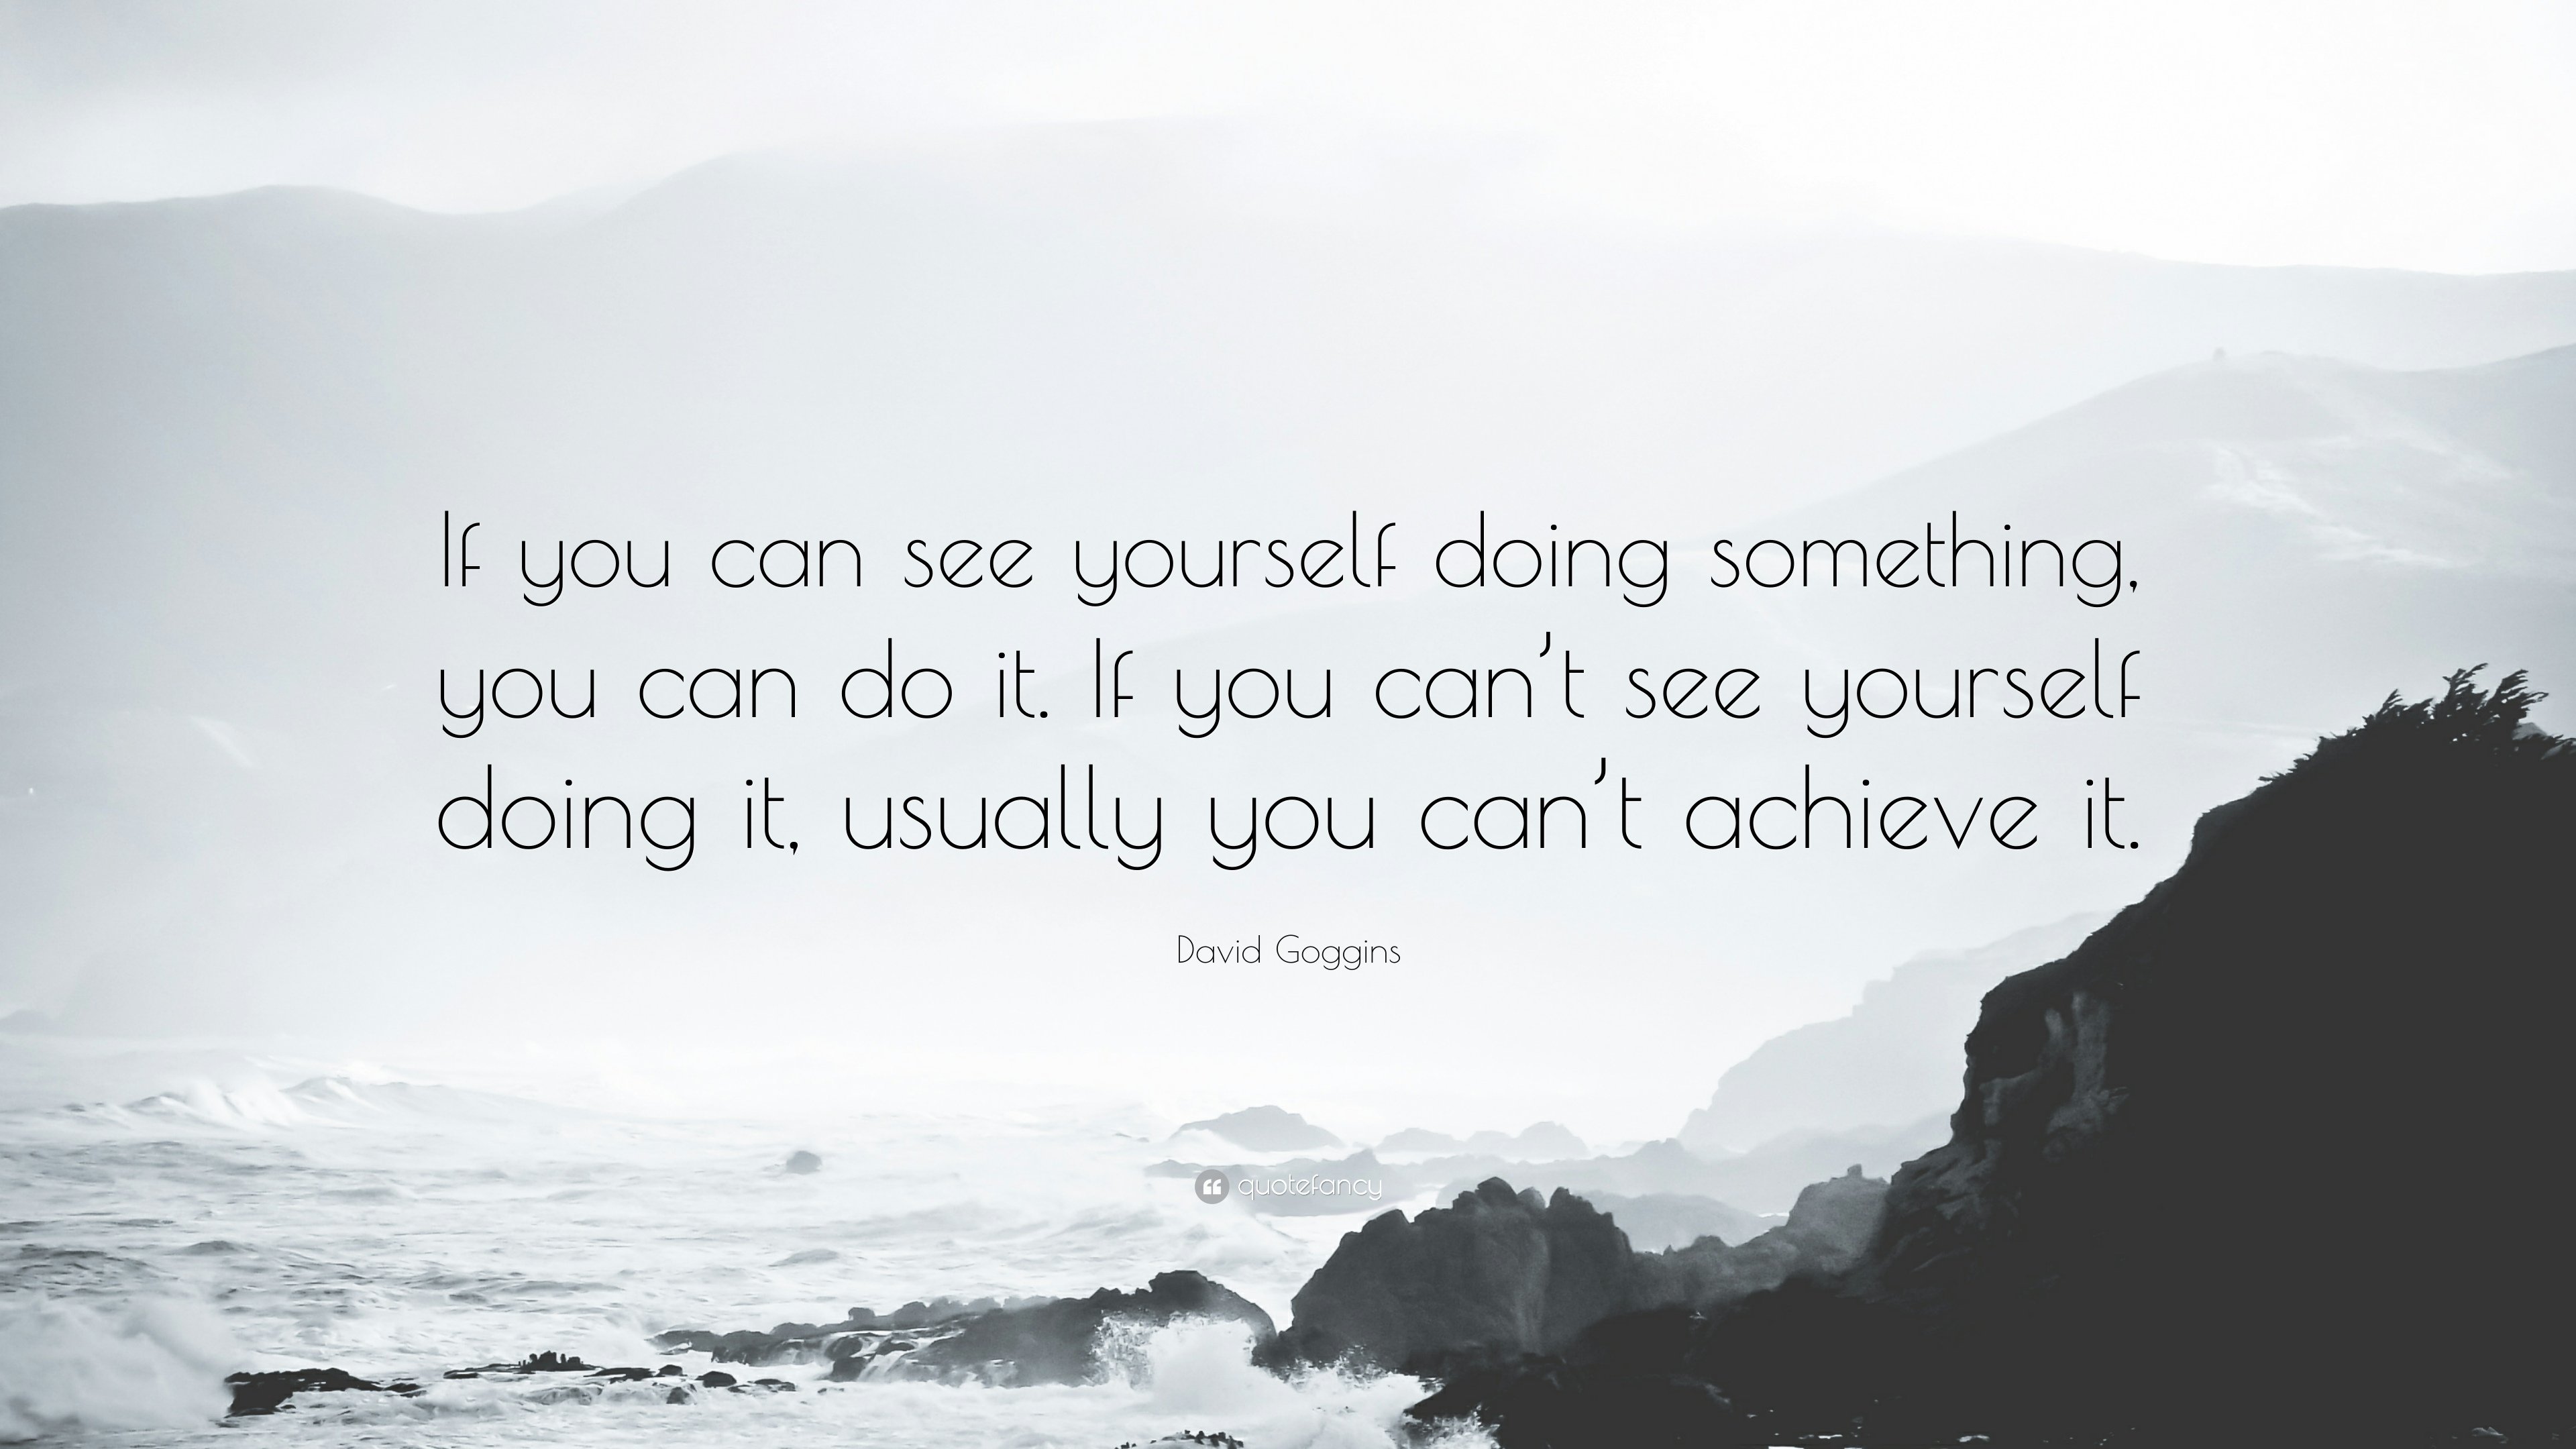 David Goggins Quote: “If you can see yourself doing